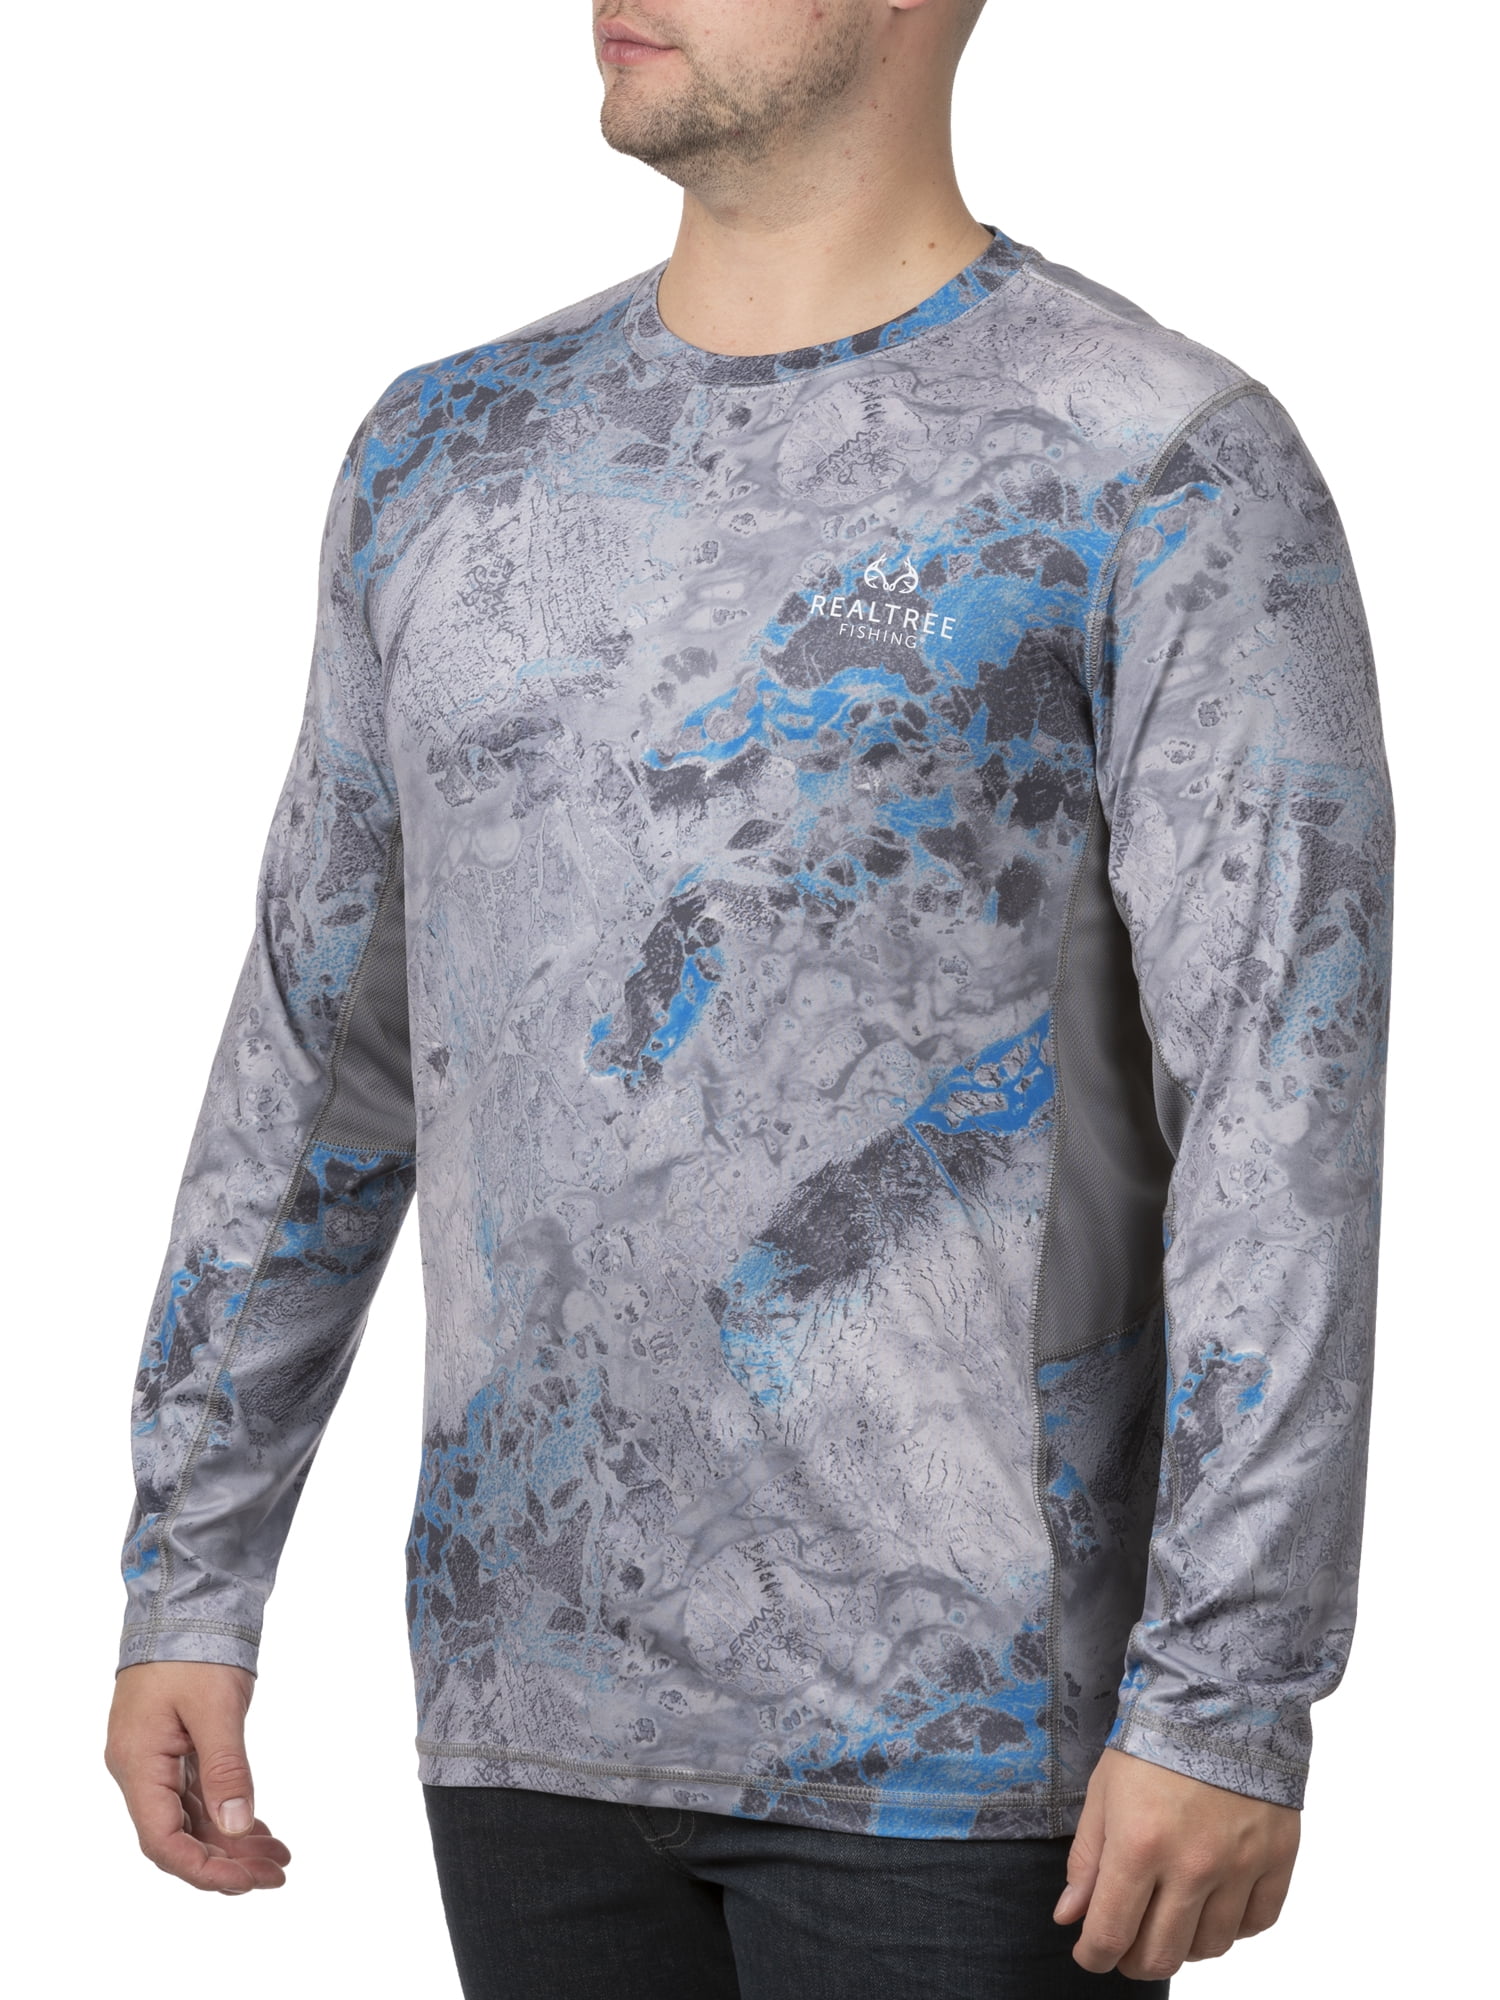 Realtree Long Sleeve Pullover Crew Neck Relaxed Fit T-Shirt (Men's) 1 Pack  